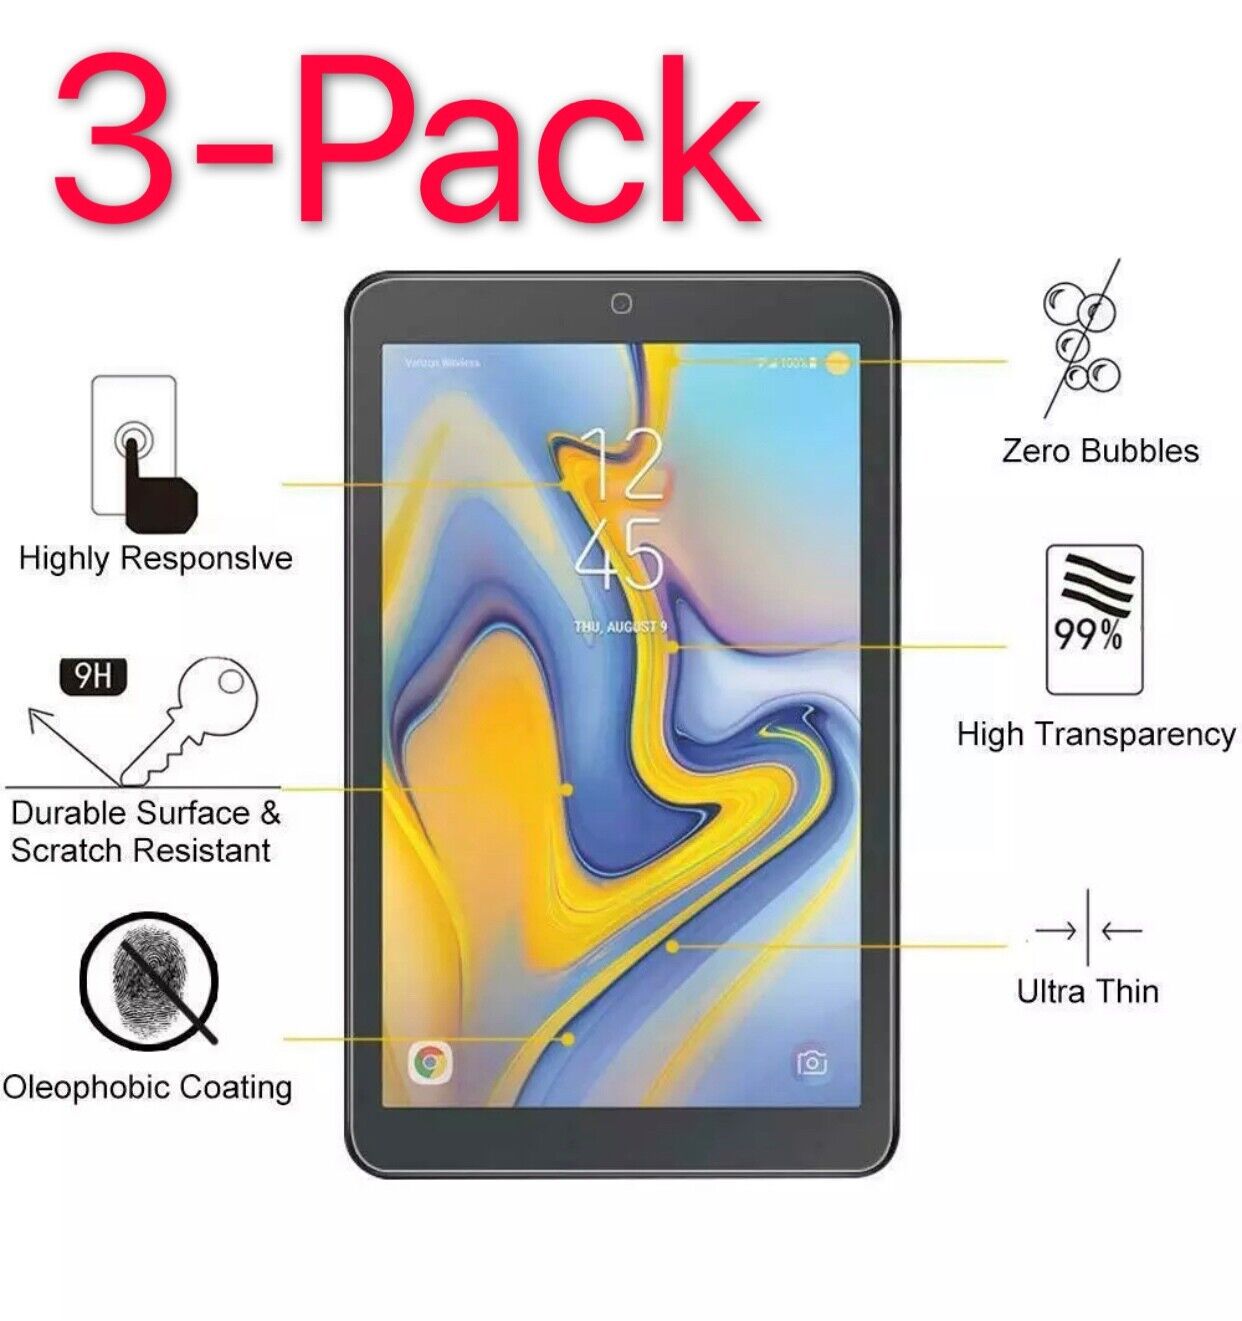 3 PACK Tempered Glass Screen Protector for Samsung Galaxy Tab A 8.0 2018 SM-T387 Unbranded T387-Tempered-Glass-2pcs